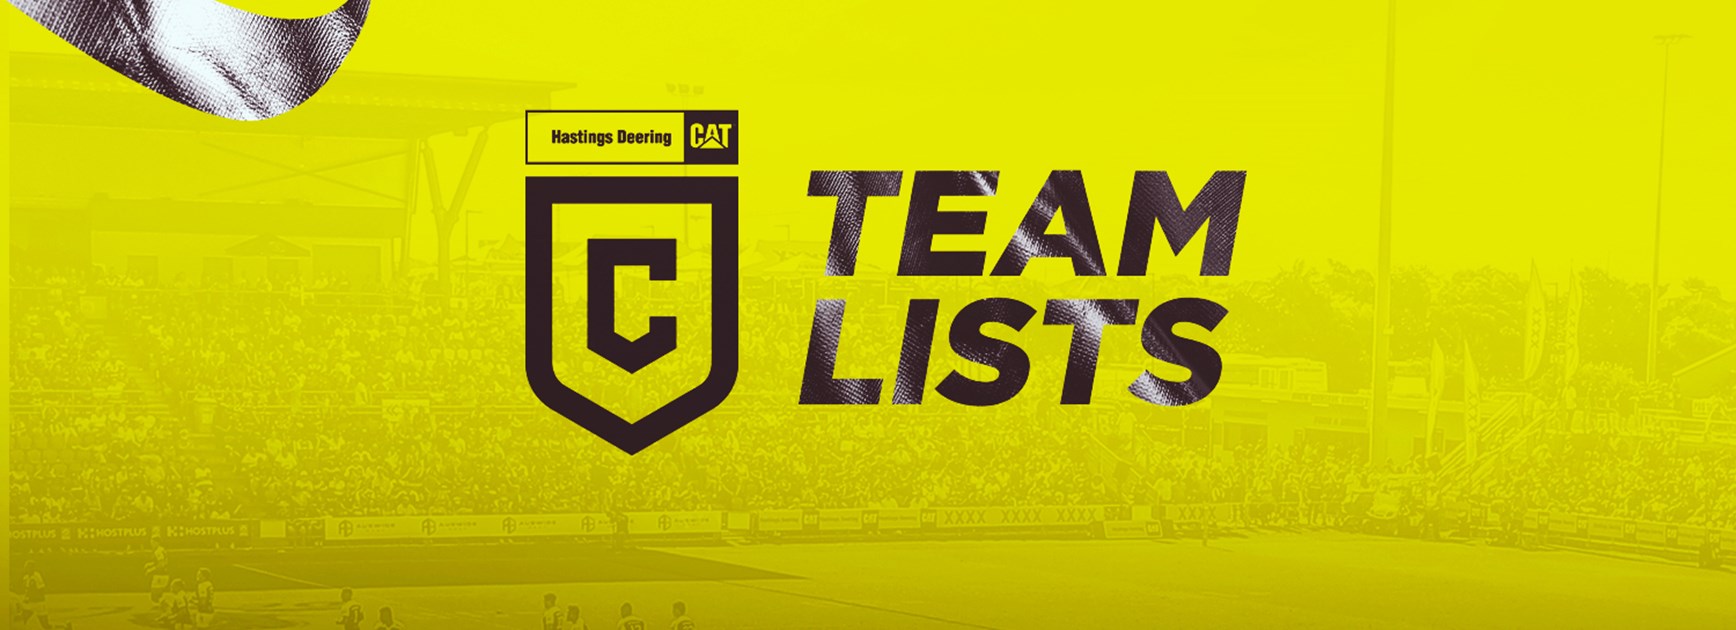 Round 11 Hastings Deering Colts team lists